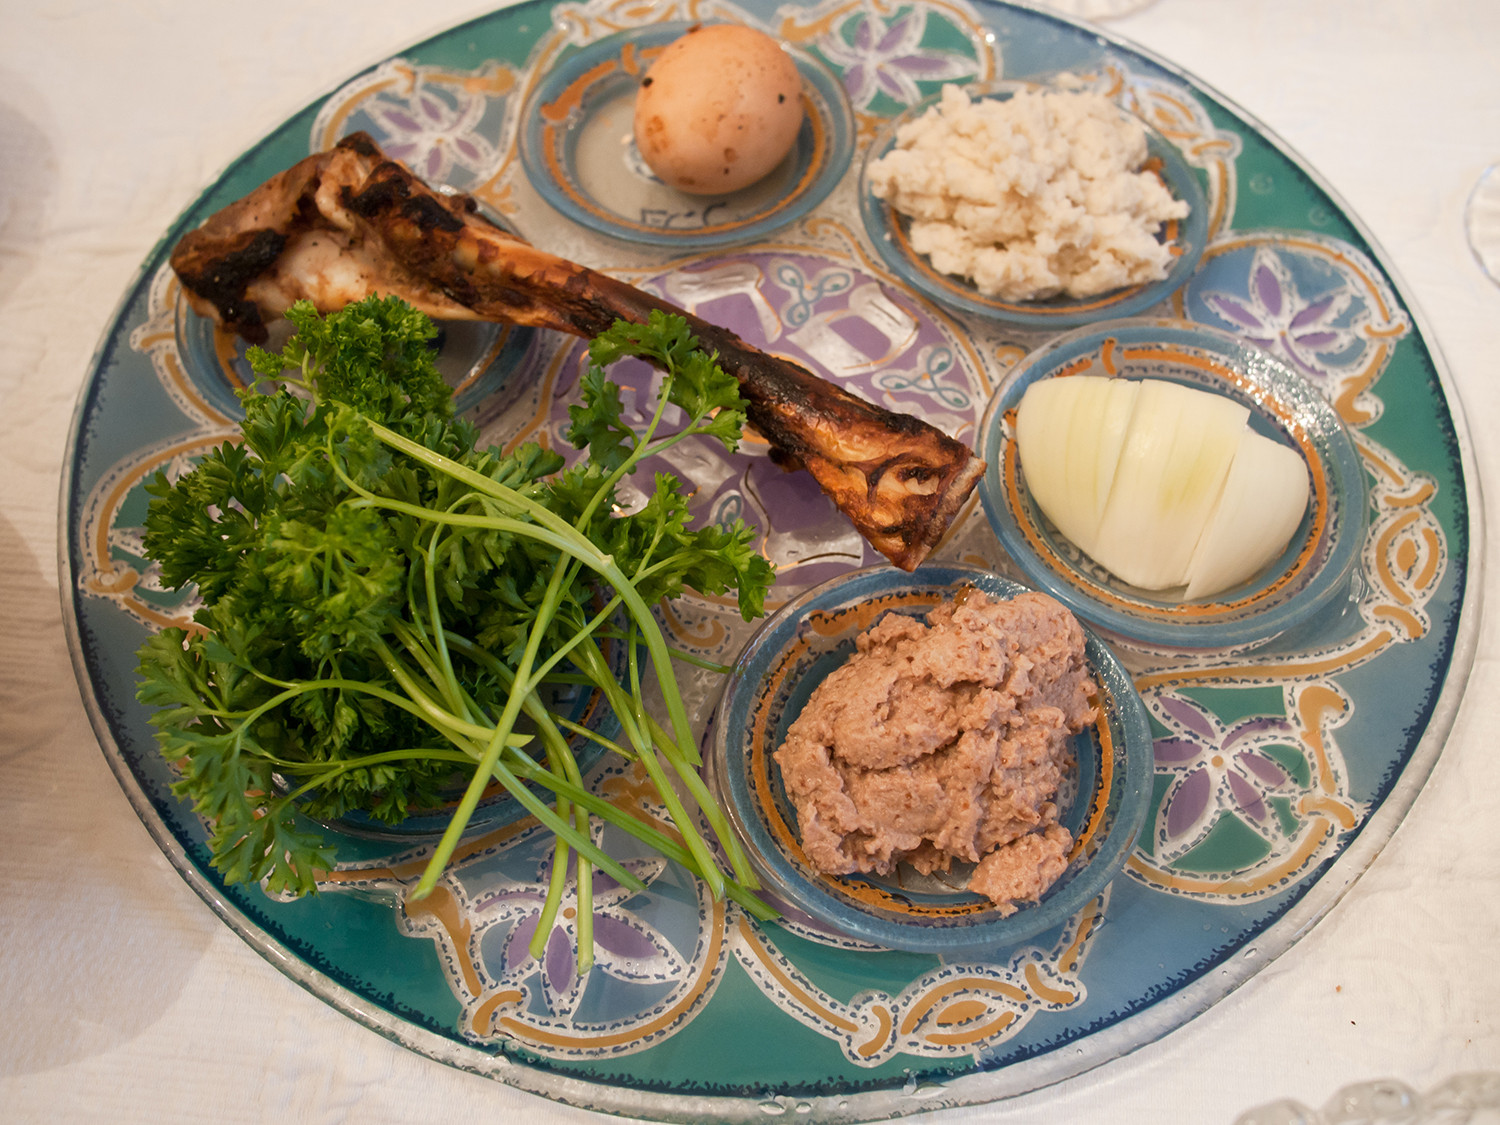 Passover Food
 Why Christians should think hard before holding Seder